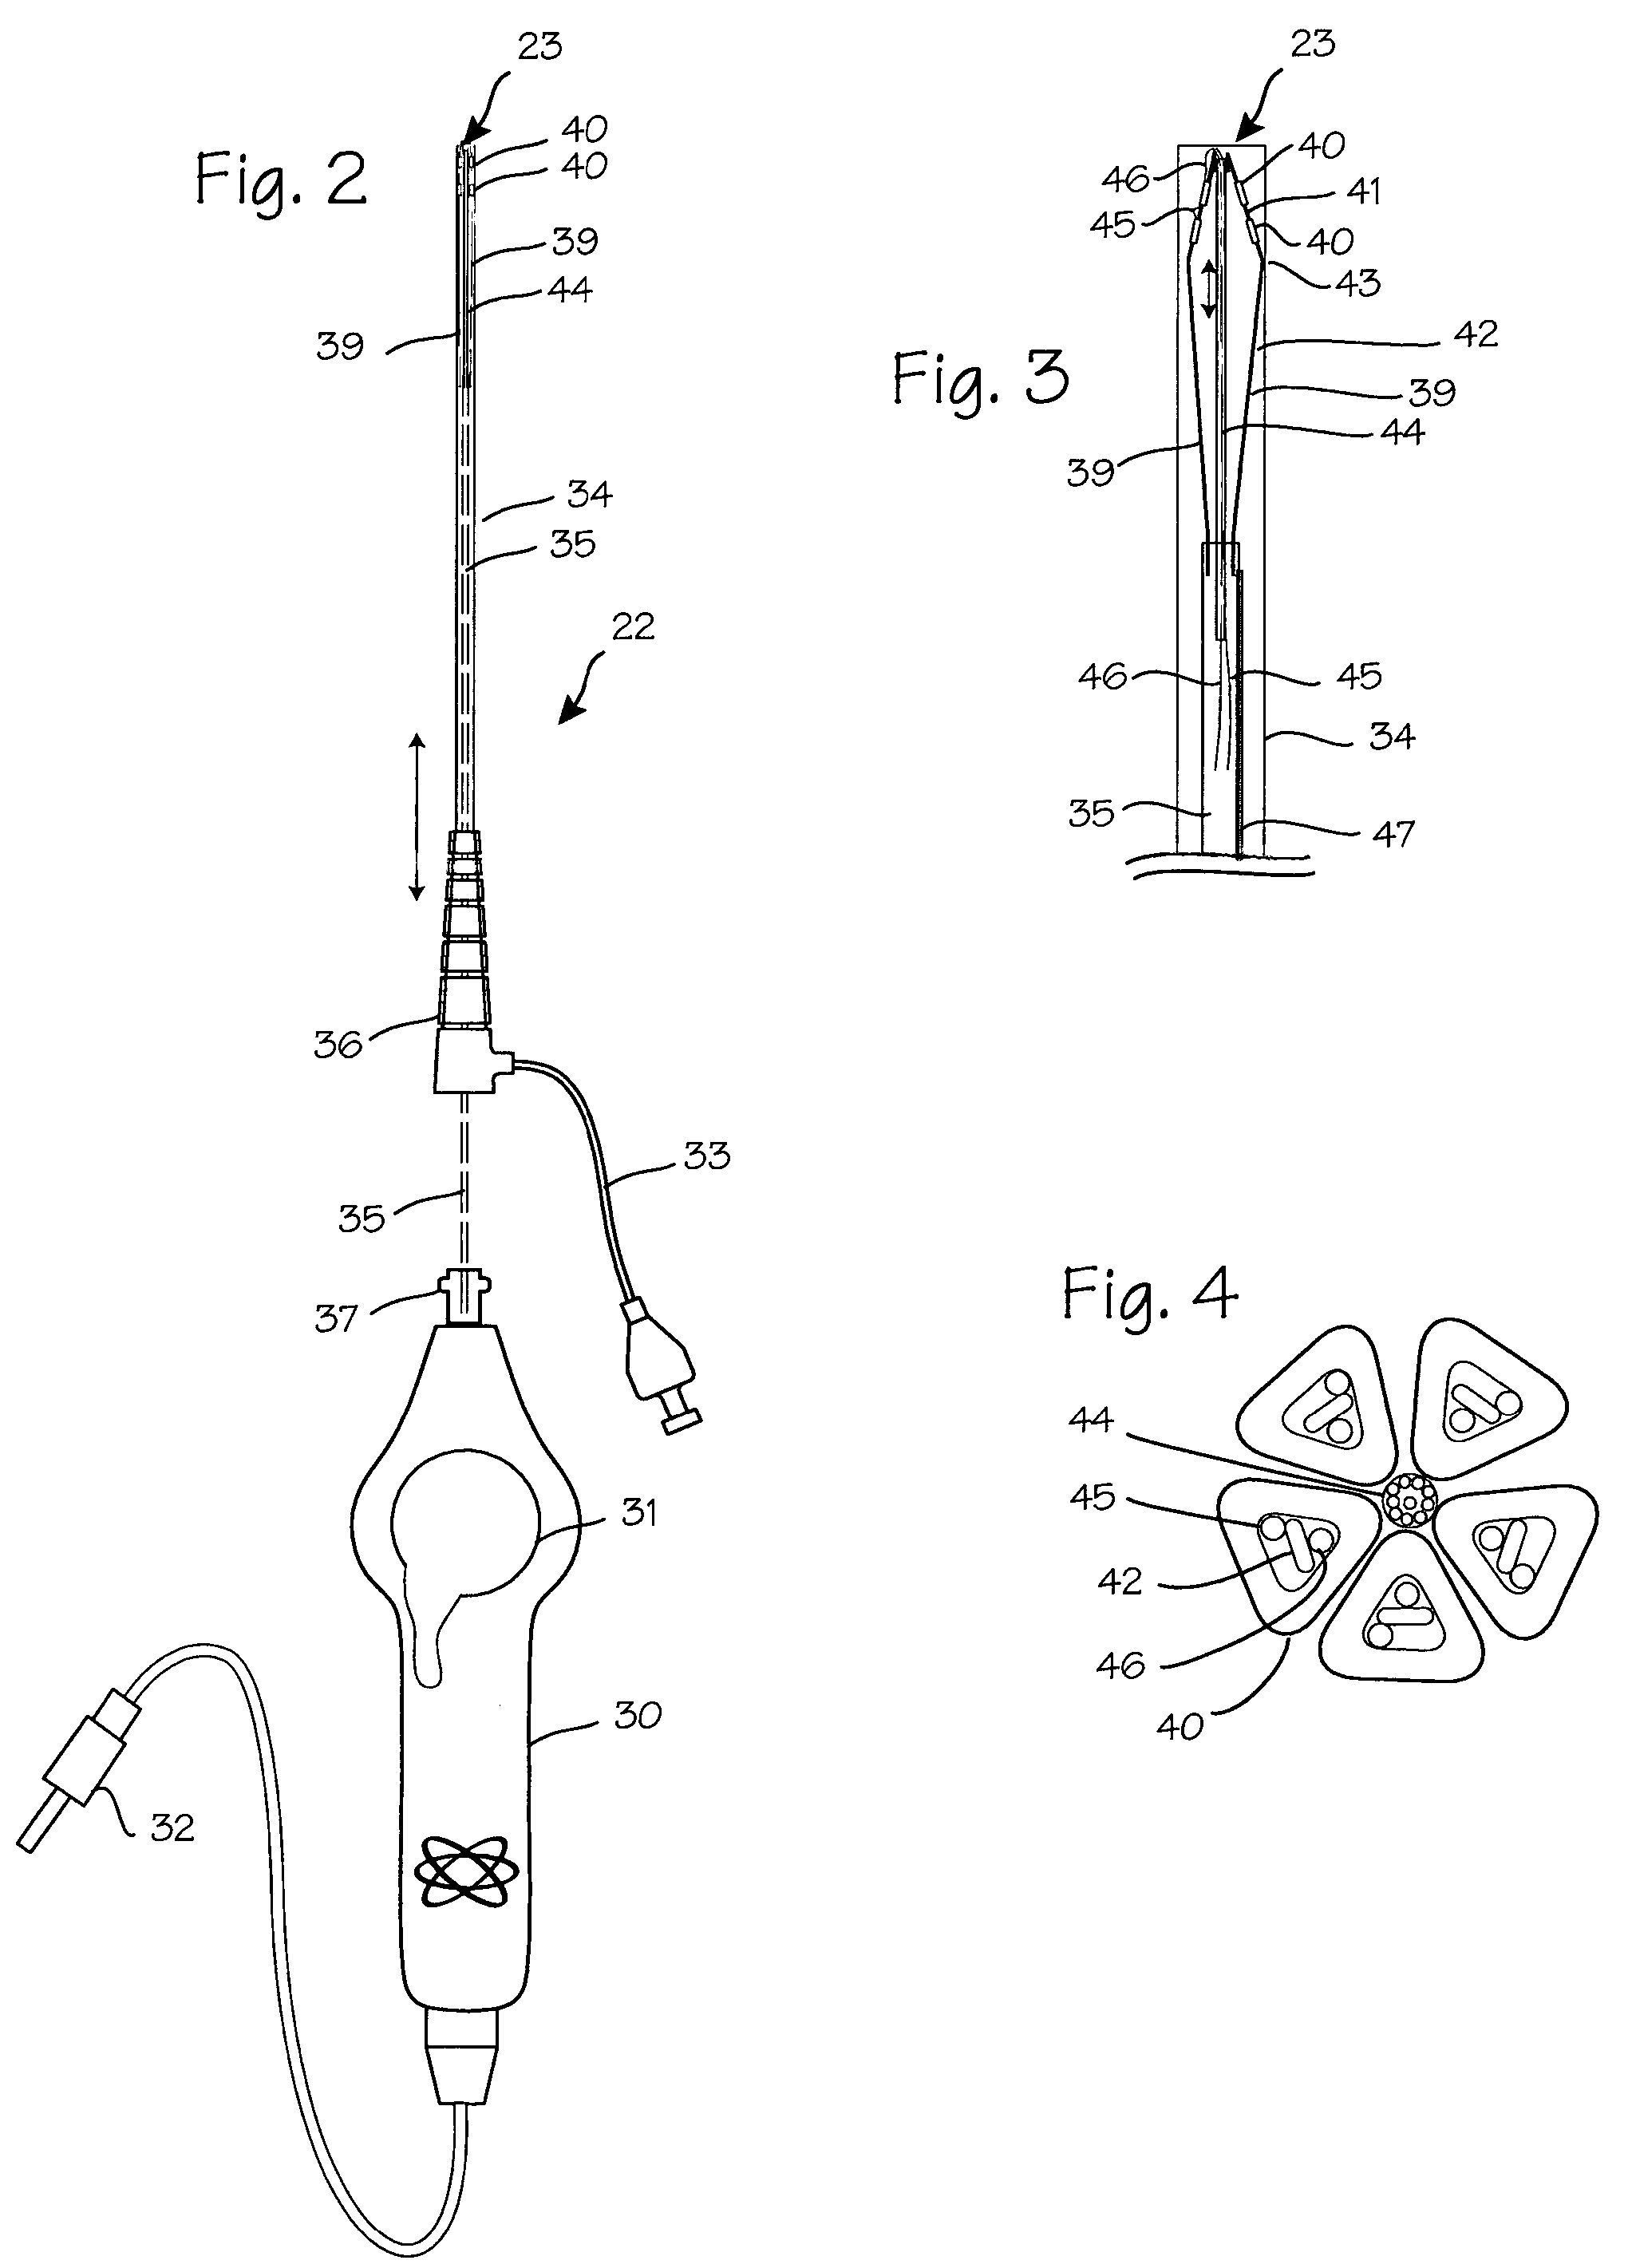 Atrial ablation catheter and method of use